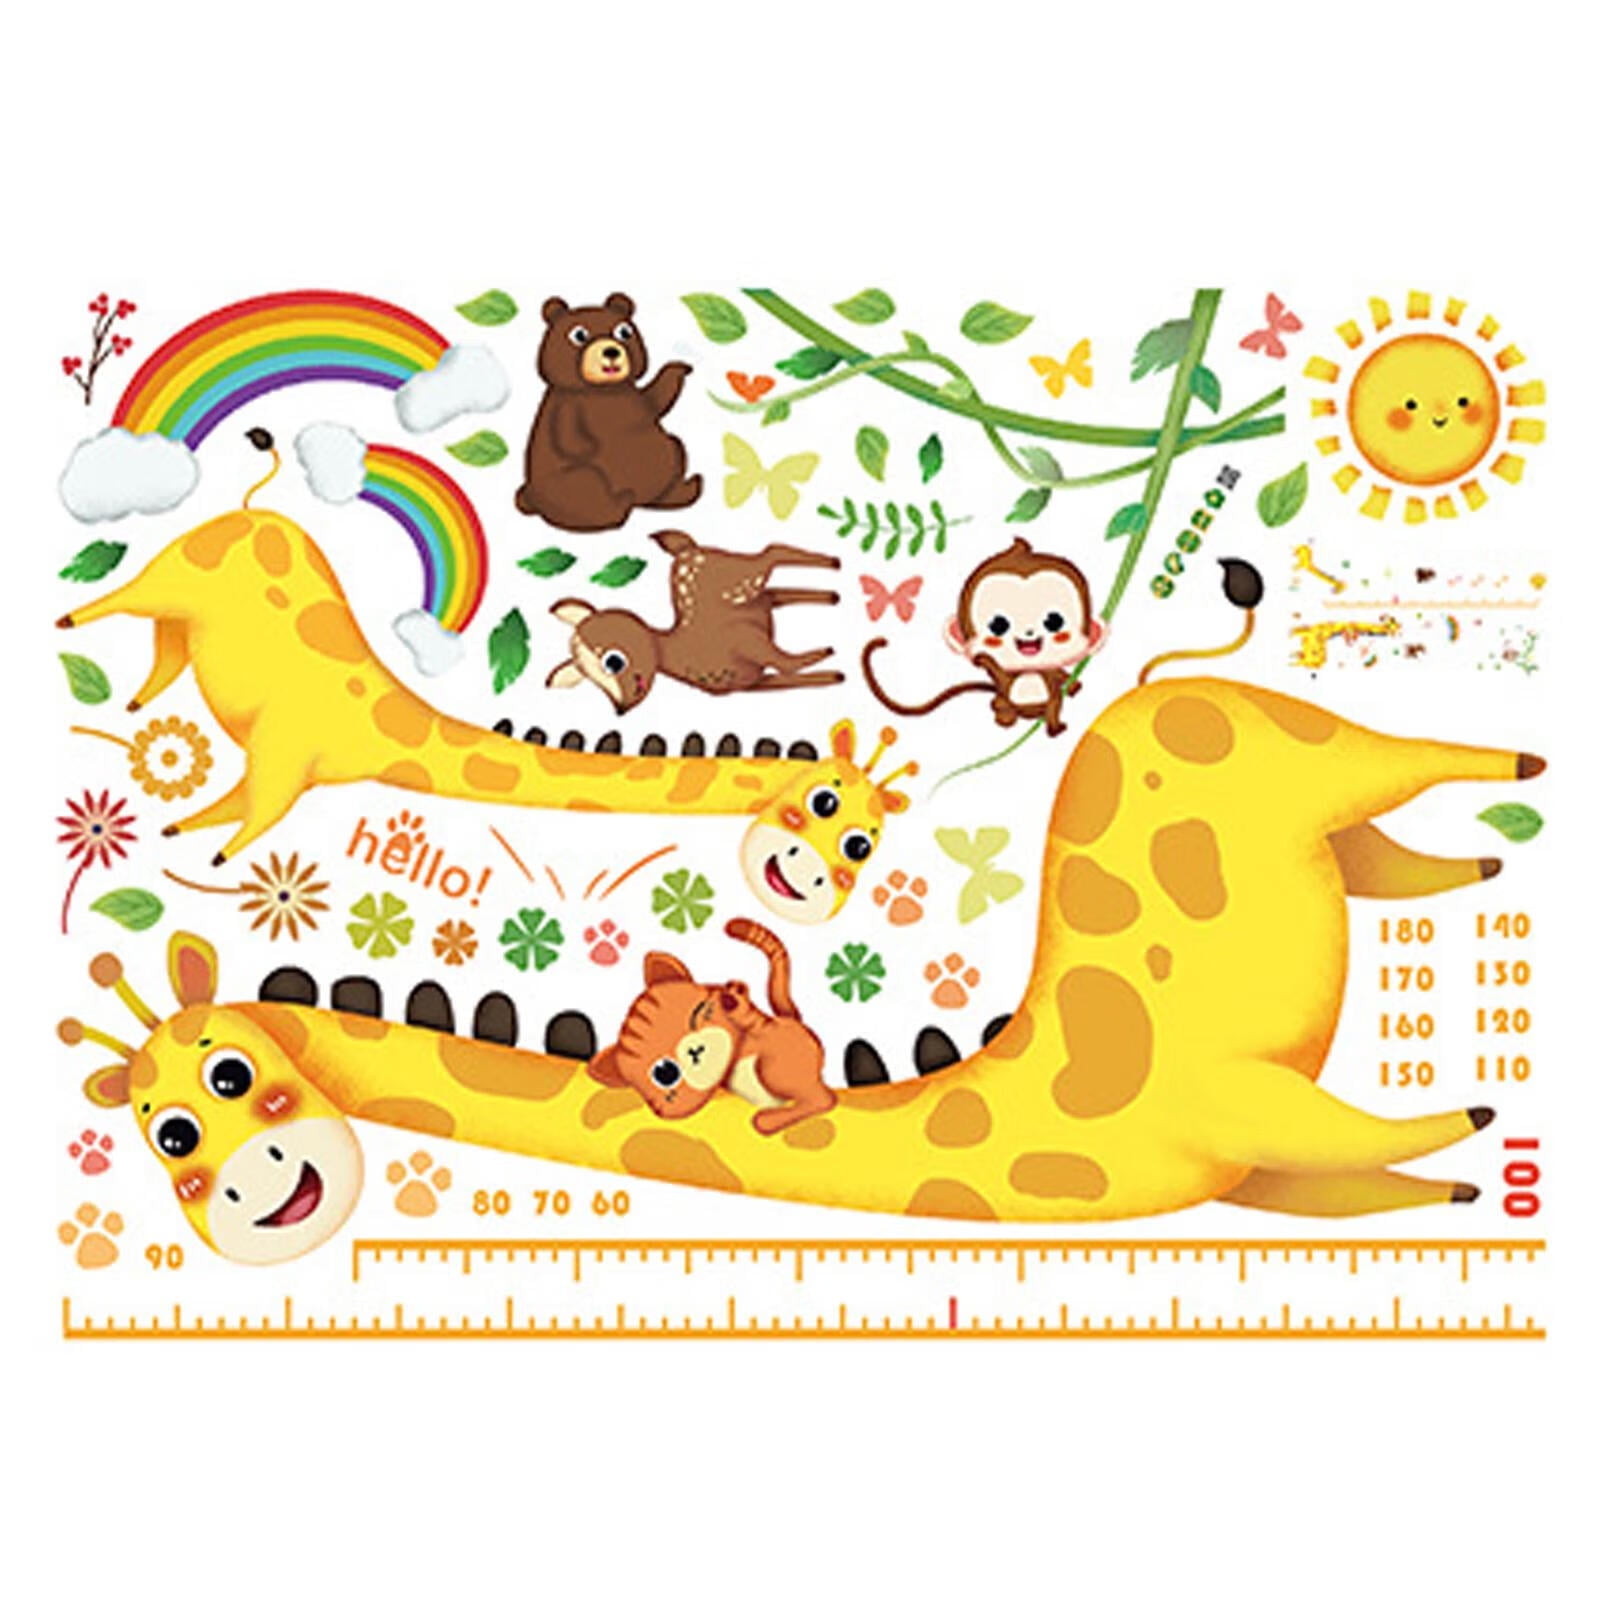 Baby Growth Chart Sticker, Animal Wallpaper Stickers Measuring Rulers for  Boys Girls Room Decoration, Baby Height Measure Giraffe Sticker Decal,  Decorating DIY Cartoon Wall Paper for Home Kids Rooms: Buy Online at